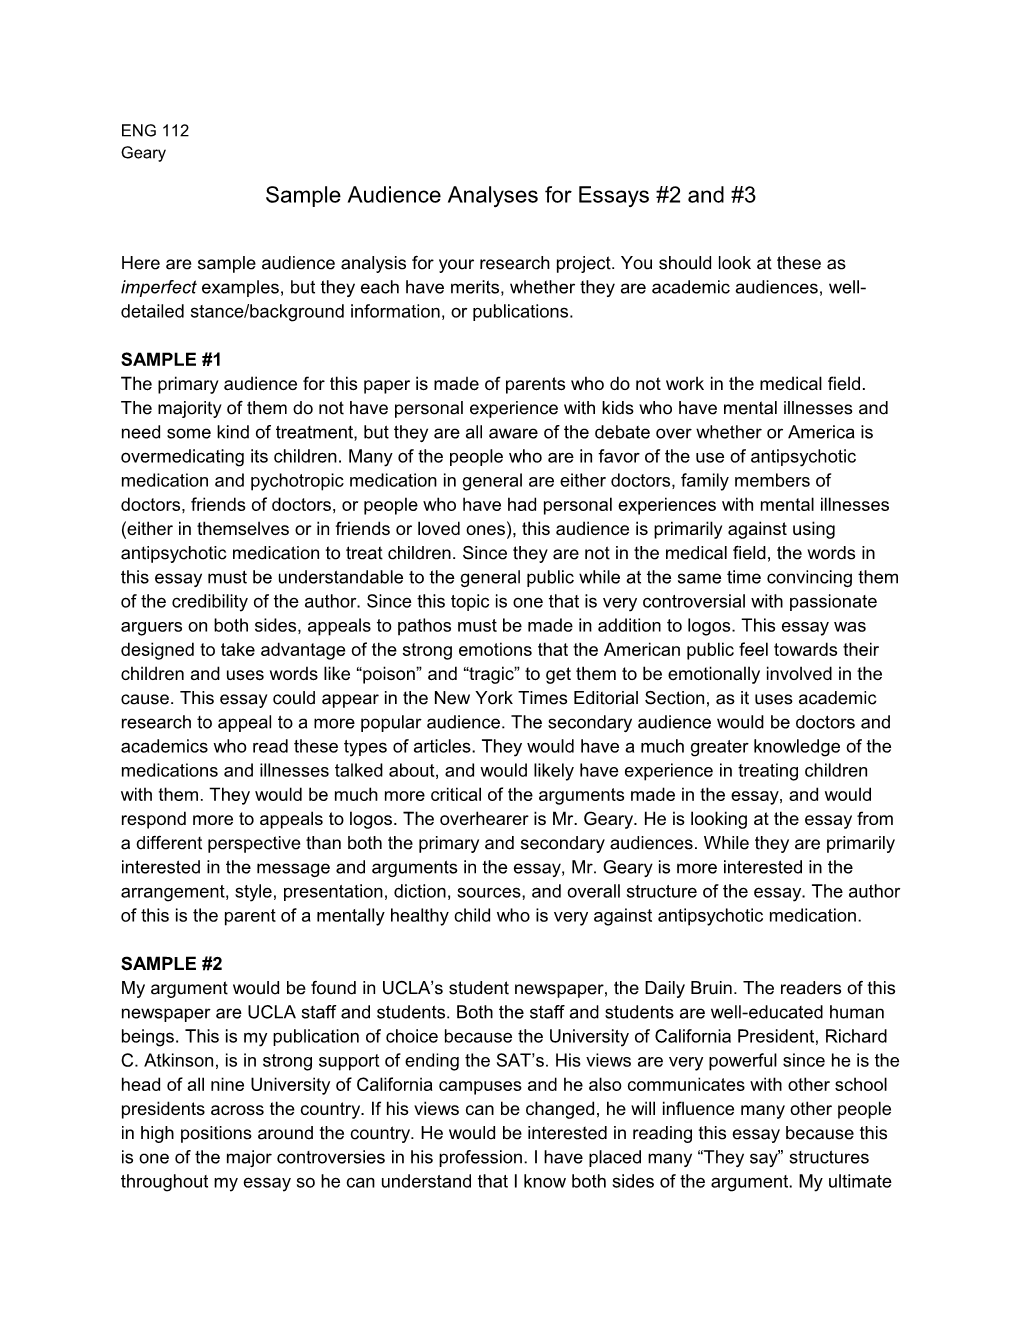 Sample Audience Analyses for Essays #2 and #3